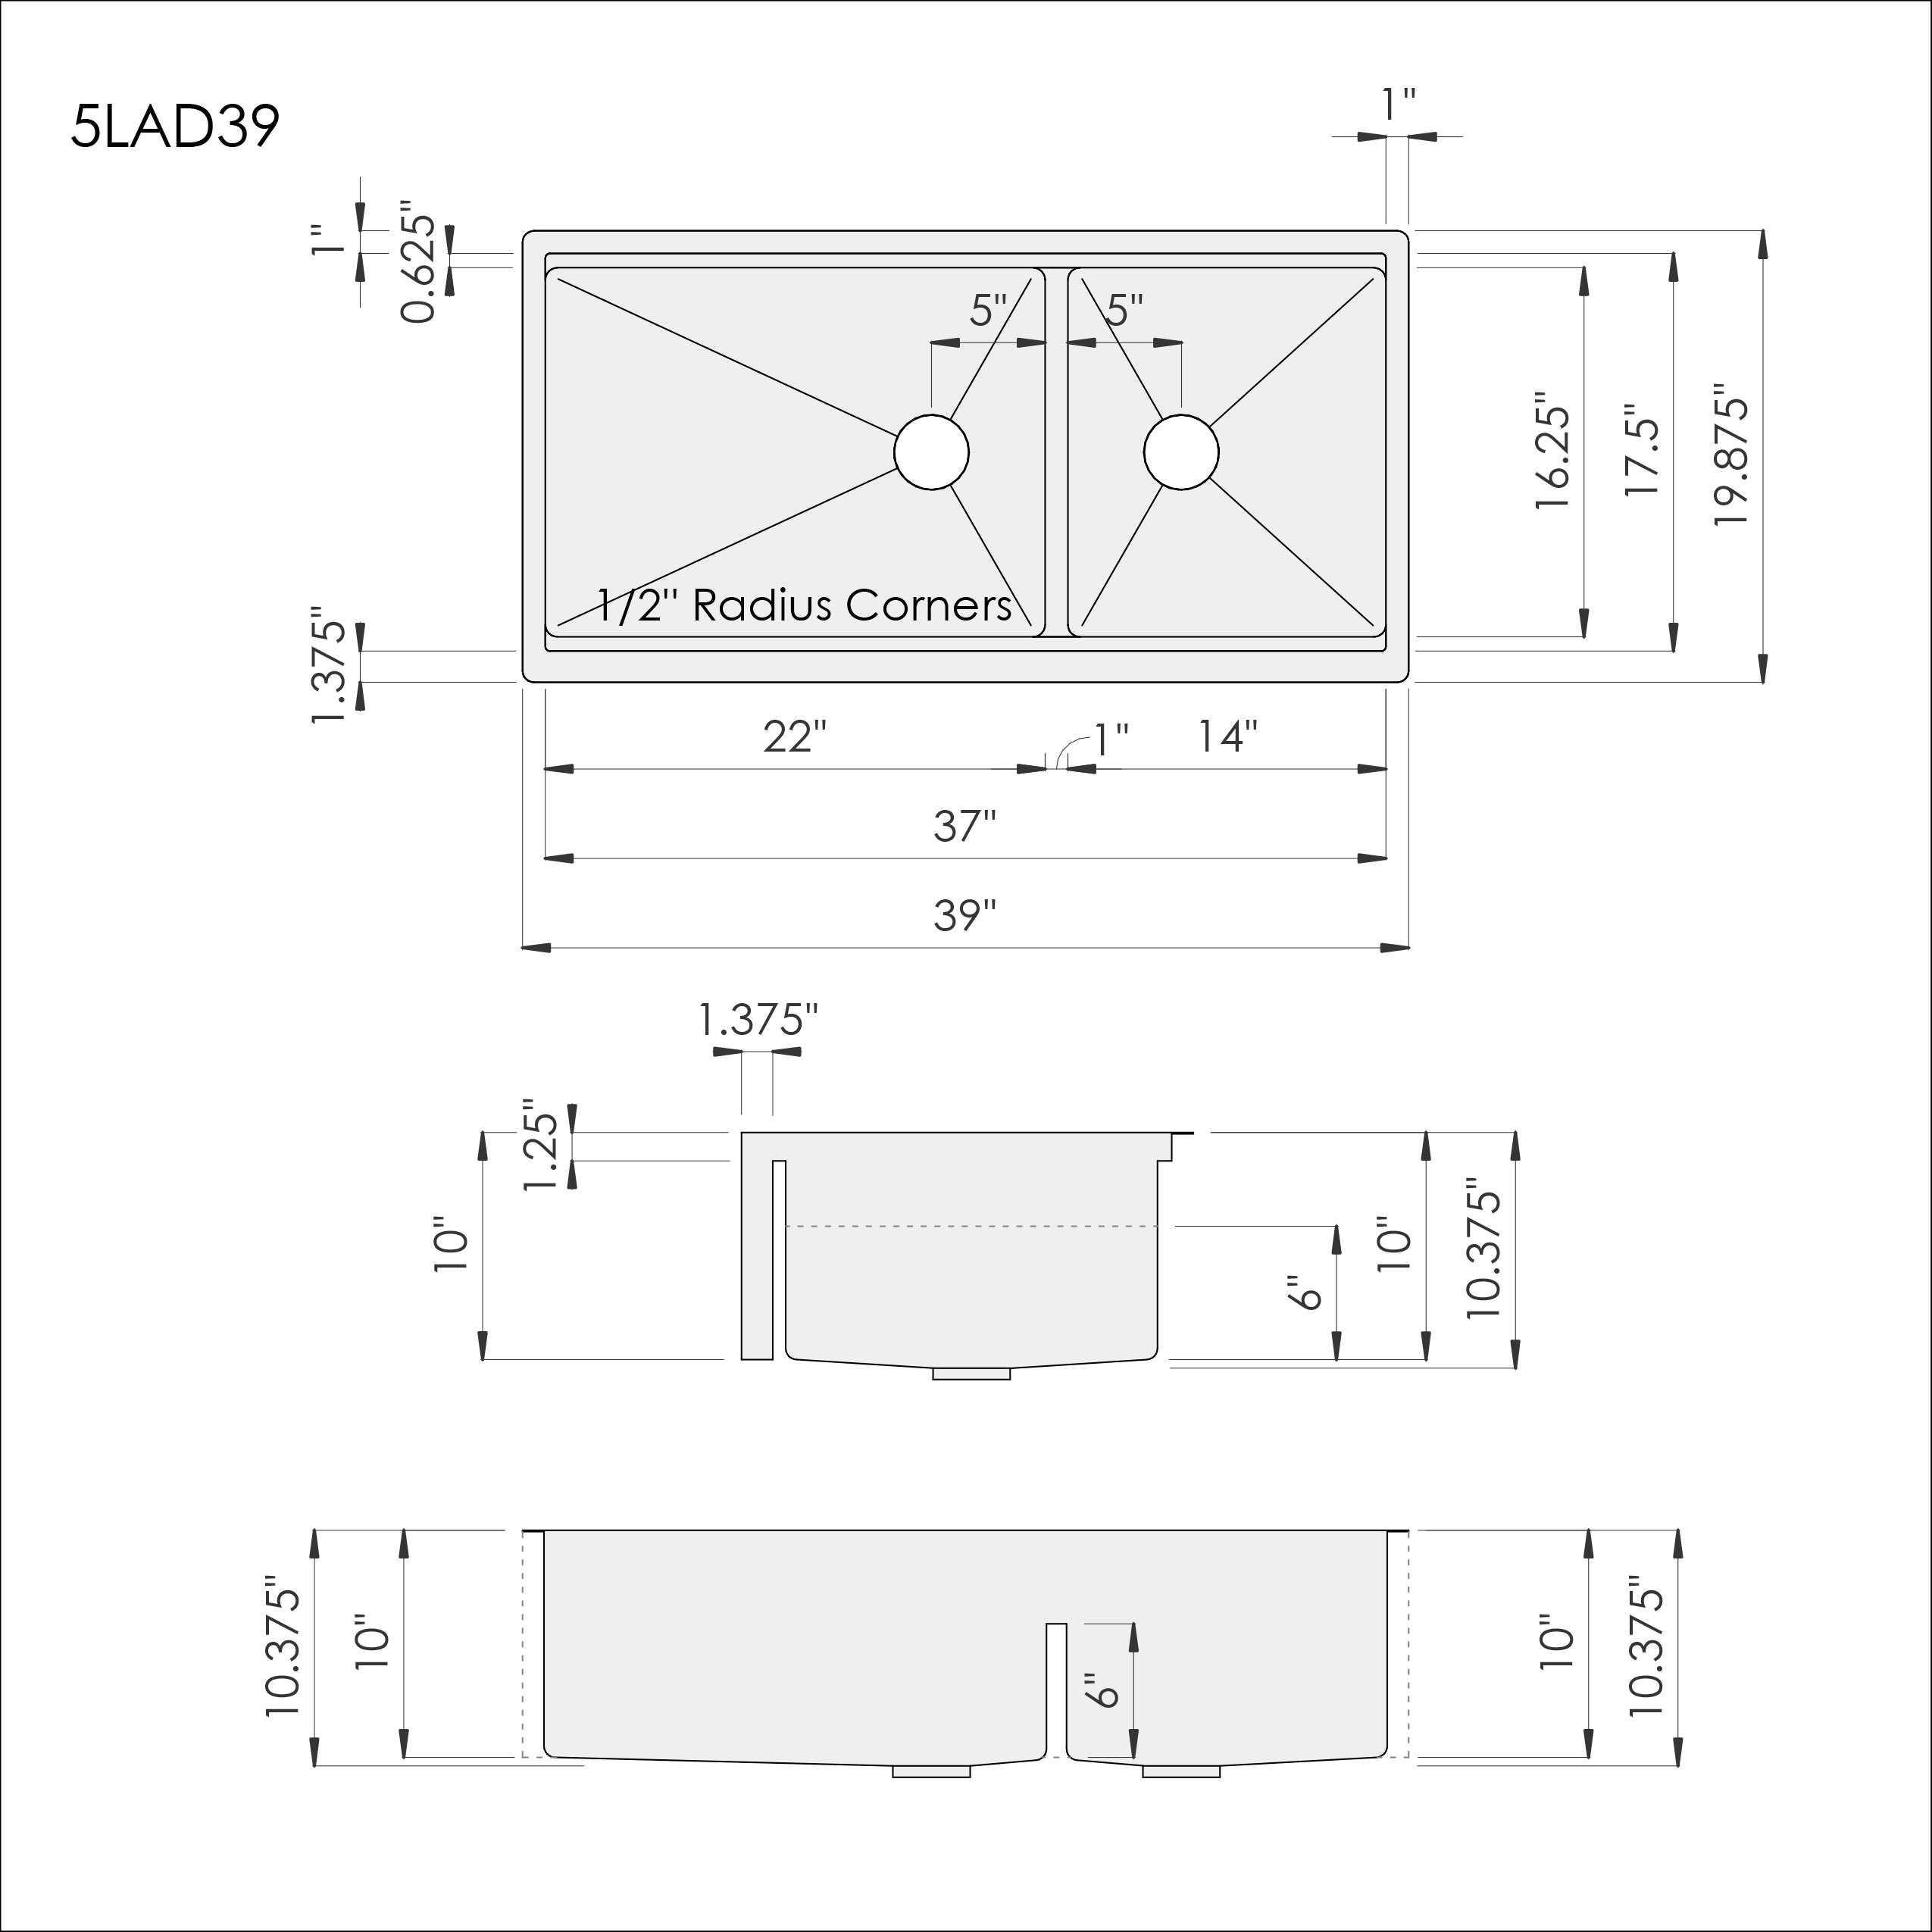 Dimensions of Create Good Sinks' 39 inch double bowl undermount stainless steel workstation sink